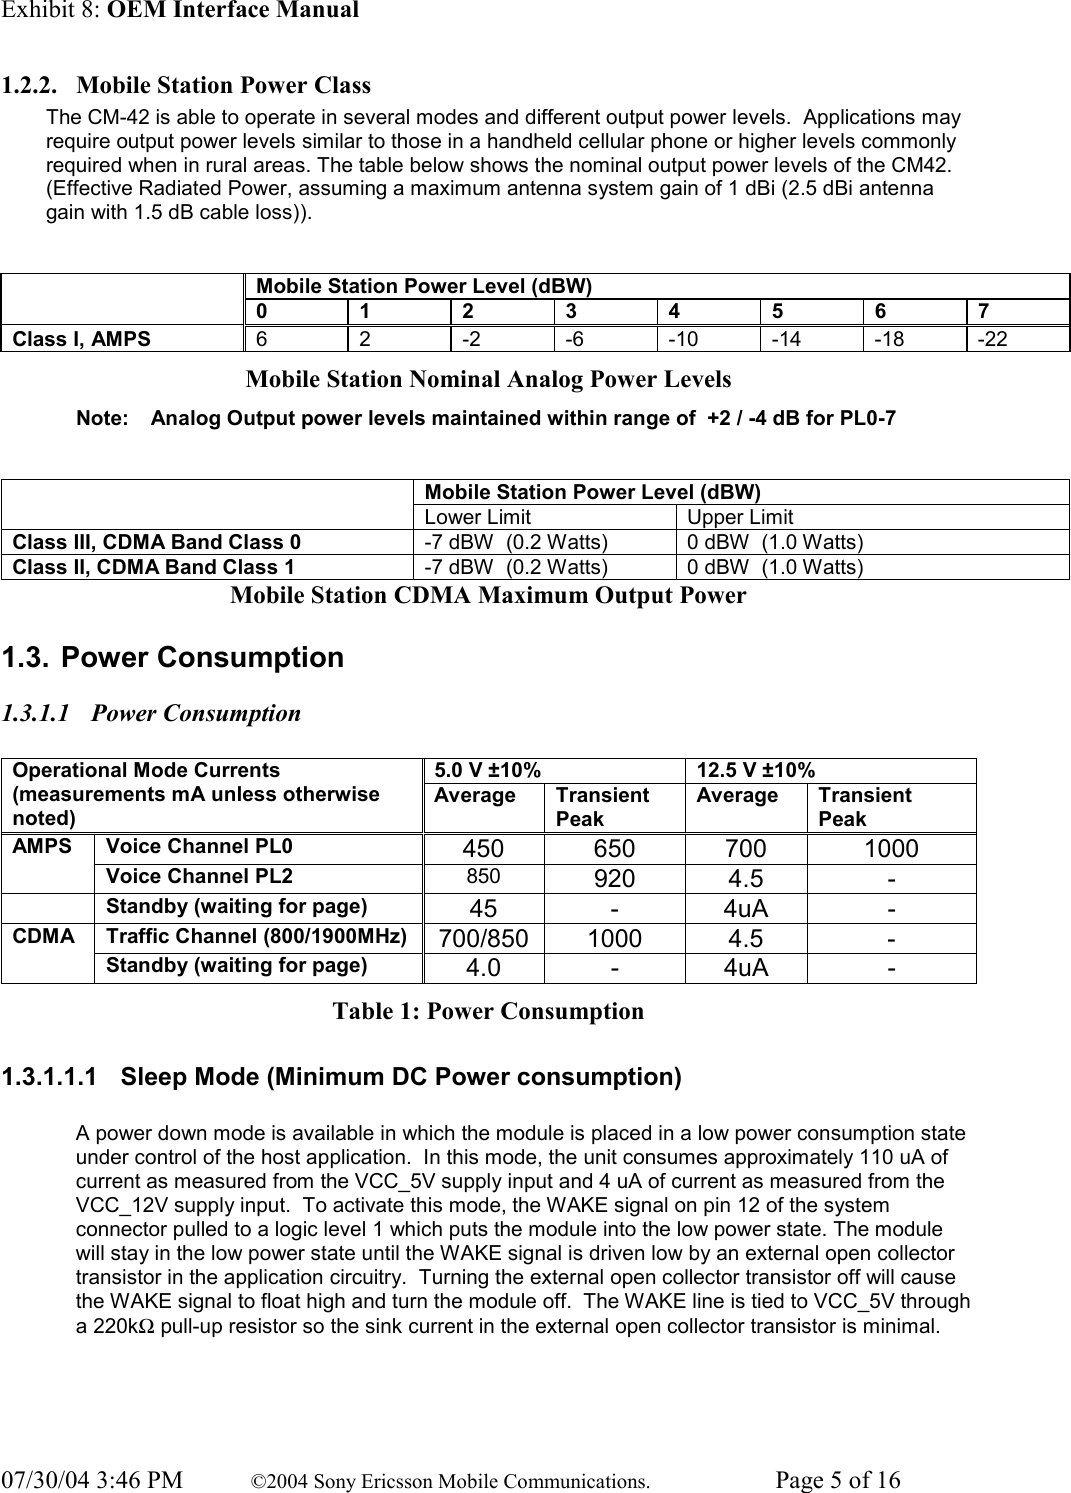 Exhibit 8: OEM Interface Manual 07/30/04 3:46 PM  ©2004 Sony Ericsson Mobile Communications.  Page 5 of 16 1.2.2. Mobile Station Power Class The CM-42 is able to operate in several modes and different output power levels.  Applications may require output power levels similar to those in a handheld cellular phone or higher levels commonly required when in rural areas. The table below shows the nominal output power levels of the CM42.  (Effective Radiated Power, assuming a maximum antenna system gain of 1 dBi (2.5 dBi antenna gain with 1.5 dB cable loss)).   Mobile Station Power Level (dBW)  0 1 2 3 4 5 6 7 Class I, AMPS  6  2  -2  -6  -10 -14 -18 -22 Mobile Station Nominal Analog Power Levels Note:  Analog Output power levels maintained within range of  +2 / -4 dB for PL0-7  Mobile Station Power Level (dBW)  Lower Limit  Upper Limit Class III, CDMA Band Class 0  -7 dBW  (0.2 Watts)  0 dBW  (1.0 Watts) Class II, CDMA Band Class 1  -7 dBW  (0.2 Watts)  0 dBW  (1.0 Watts) Mobile Station CDMA Maximum Output Power 1.3. Power Consumption 1.3.1.1 Power Consumption  5.0 V ±10%  12.5 V ±10% Operational Mode Currents (measurements mA unless otherwise noted) Average Transient Peak Average Transient Peak Voice Channel PL0  450 650 700  1000 AMPS Voice Channel PL2  850  920 4.5  -   Standby (waiting for page)  45 - 4uA  - Traffic Channel (800/1900MHz)  700/850 1000  4.5  - CDMA Standby (waiting for page)  4.0 - 4uA  - Table 1: Power Consumption 1.3.1.1.1  Sleep Mode (Minimum DC Power consumption)  A power down mode is available in which the module is placed in a low power consumption state under control of the host application.  In this mode, the unit consumes approximately 110 uA of current as measured from the VCC_5V supply input and 4 uA of current as measured from the VCC_12V supply input.  To activate this mode, the WAKE signal on pin 12 of the system connector pulled to a logic level 1 which puts the module into the low power state. The module will stay in the low power state until the WAKE signal is driven low by an external open collector transistor in the application circuitry.  Turning the external open collector transistor off will cause the WAKE signal to float high and turn the module off.  The WAKE line is tied to VCC_5V through a 220kΩ pull-up resistor so the sink current in the external open collector transistor is minimal.  